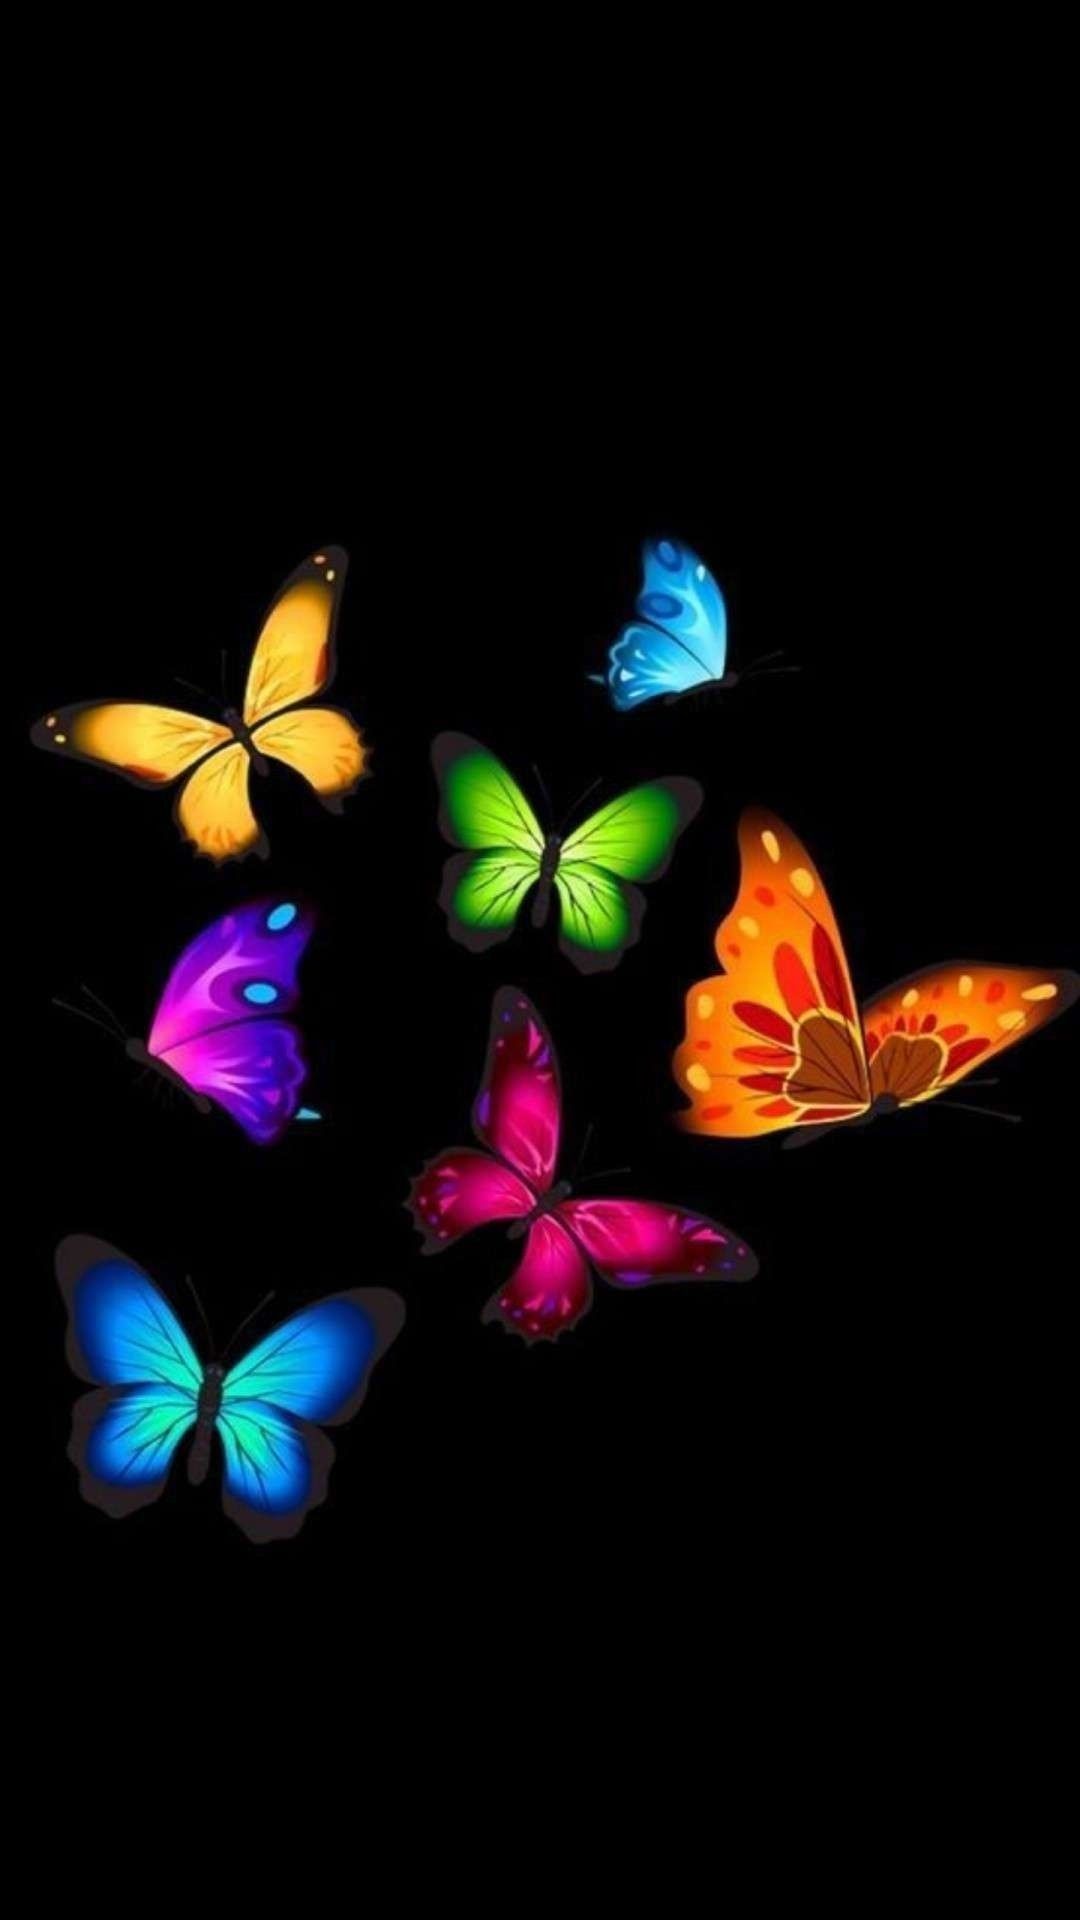 Butterfly Art, Butterflies, Wallpapers Android, Stuffing, - Android